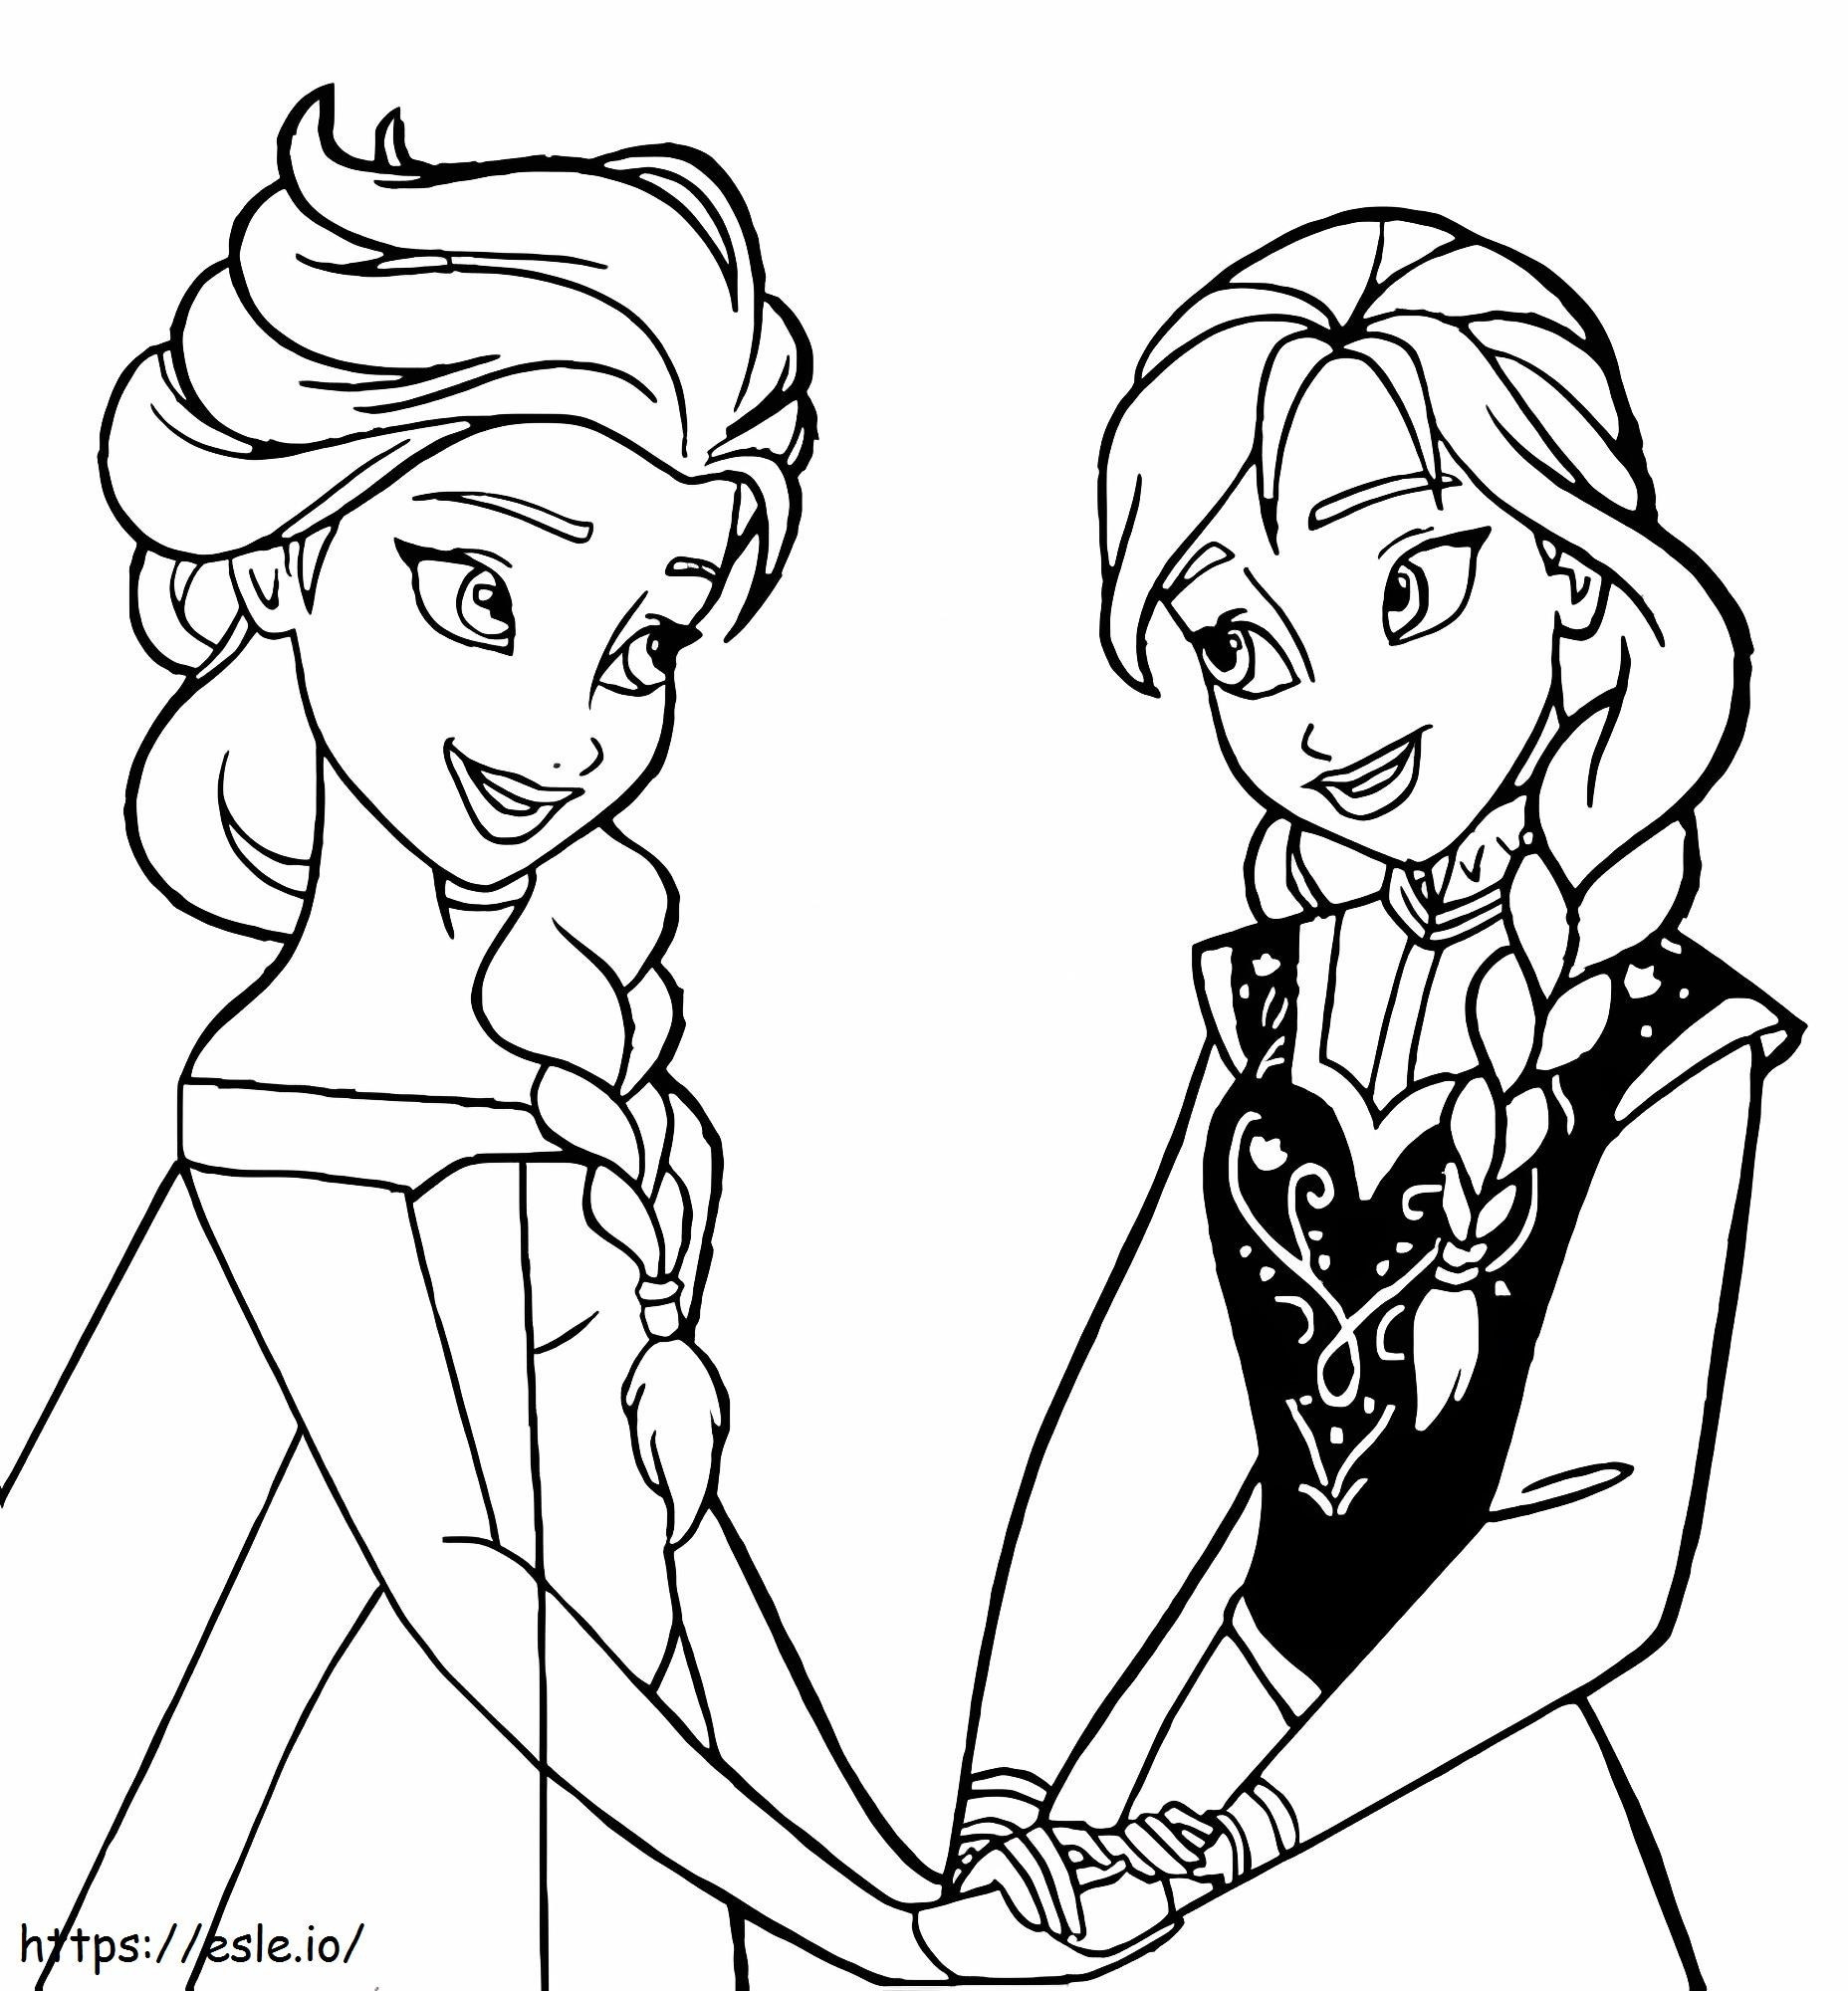 Elsa And Anna Holding Hands coloring page